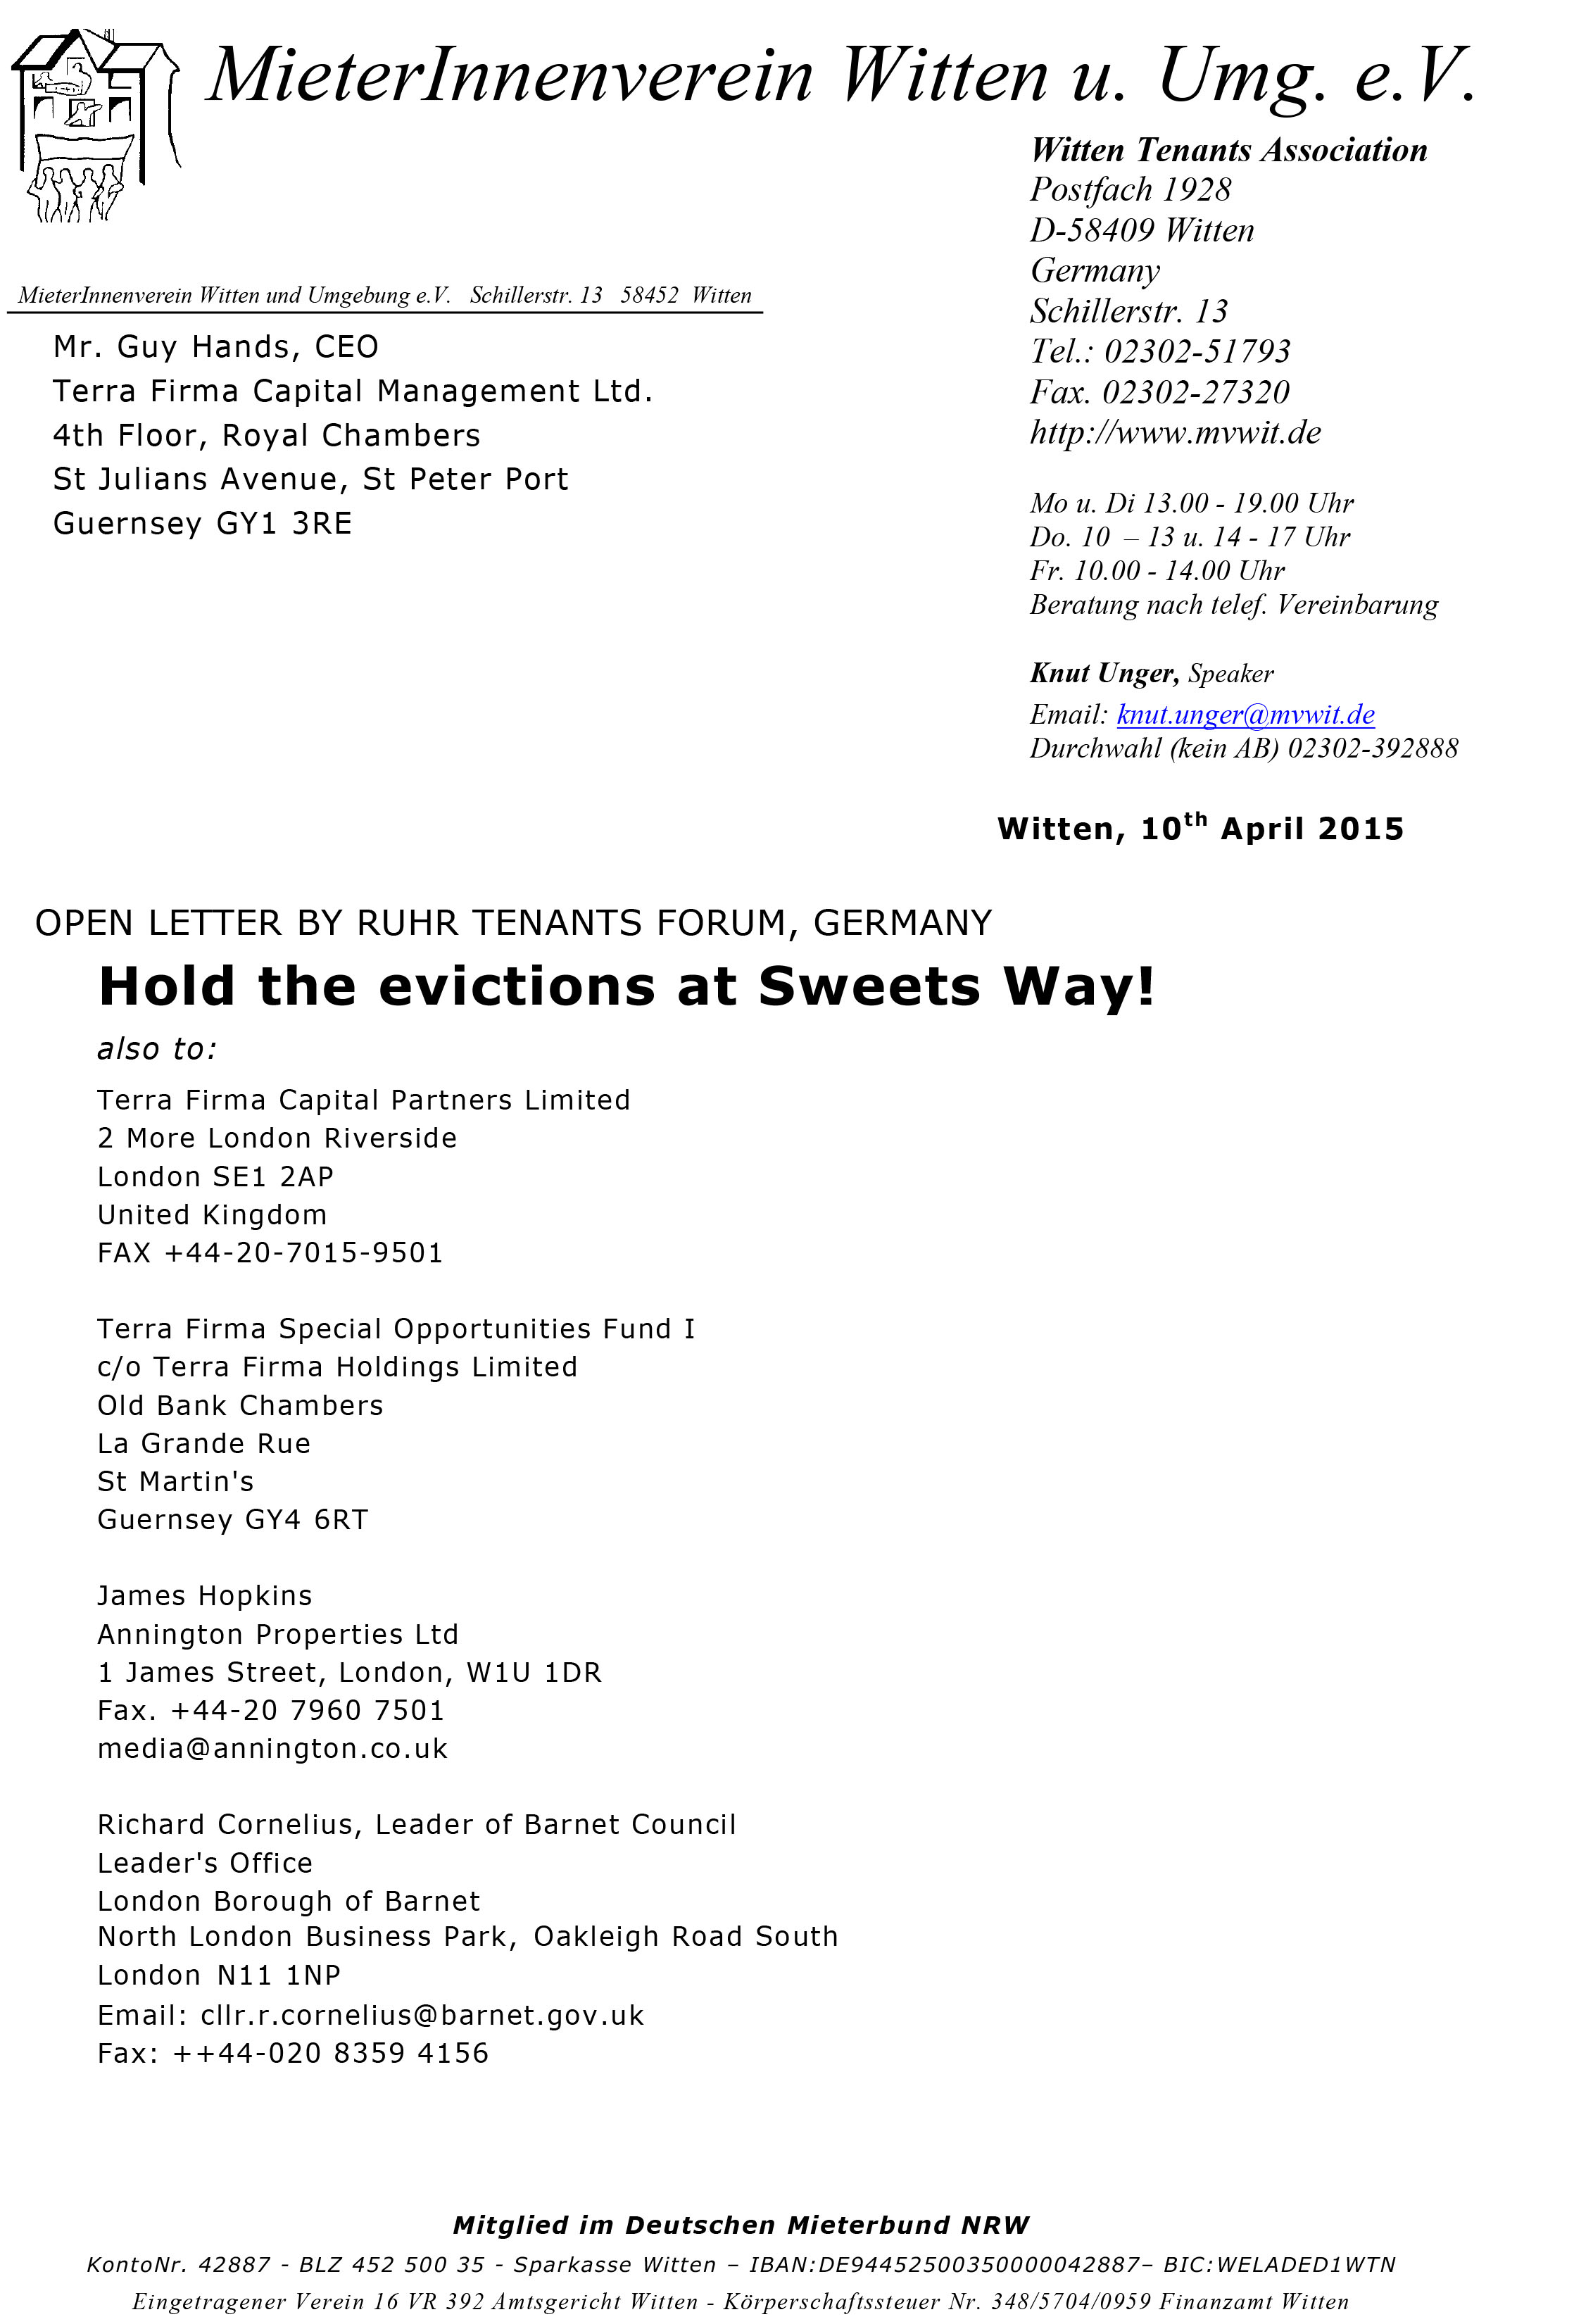 Hold the evictions at Sweets Way!